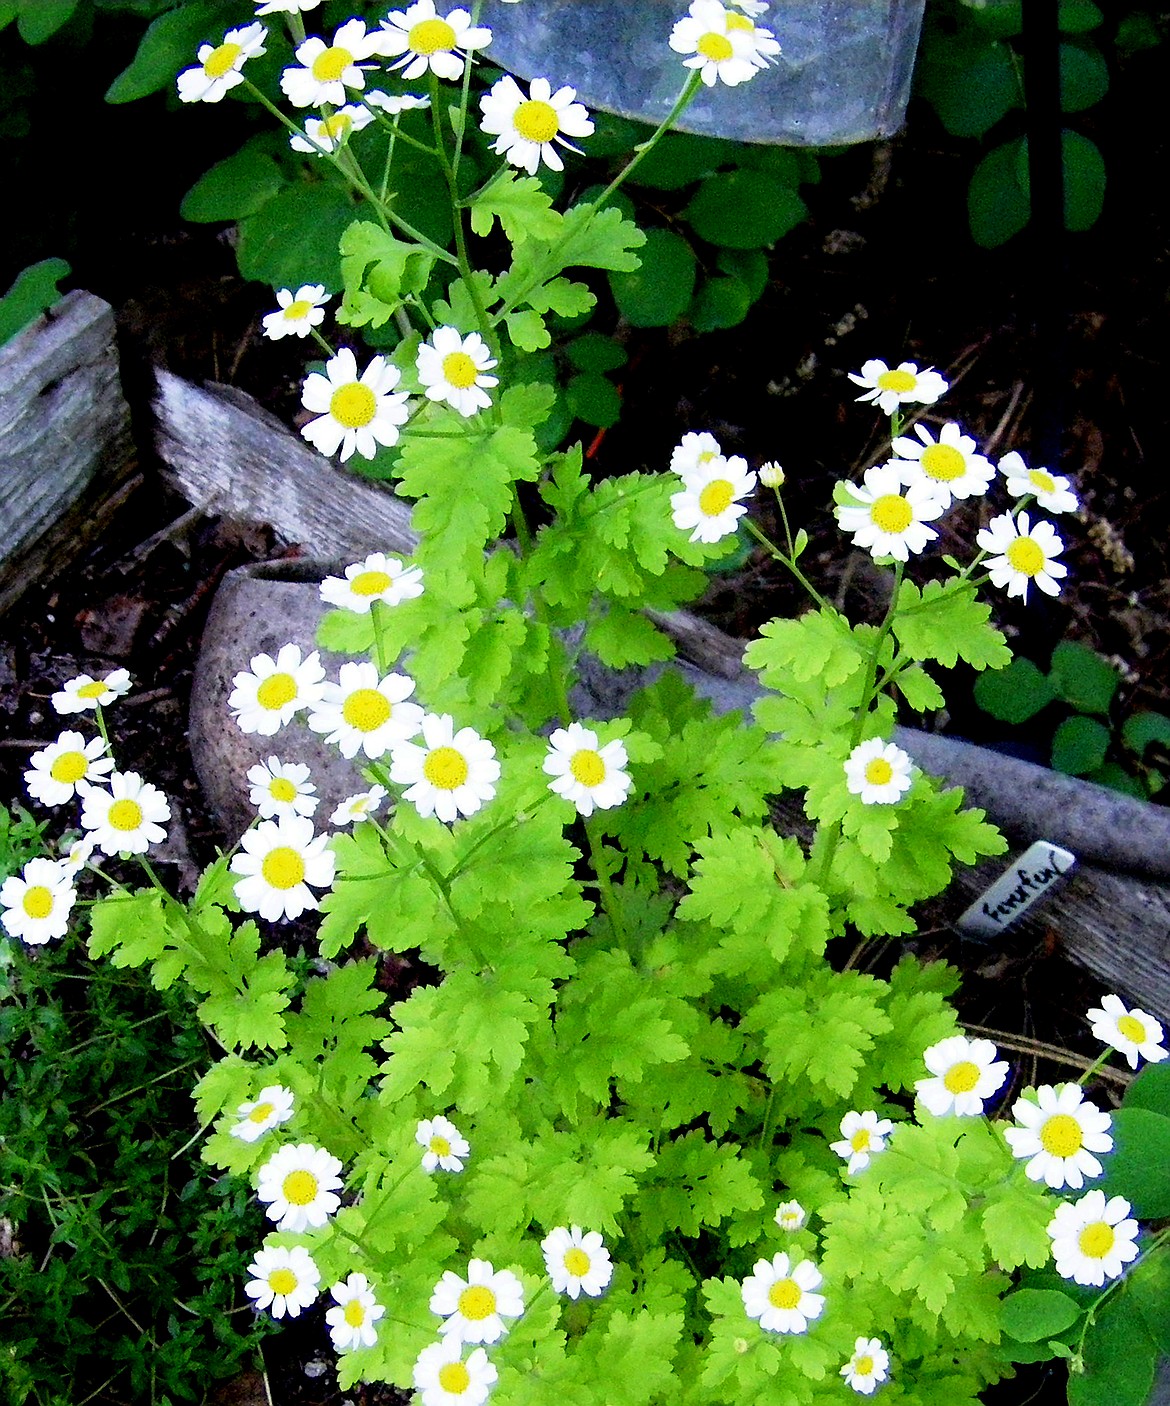 Feverfew, a treasured old medicinal, makes a sweet focal point as an ornamental.